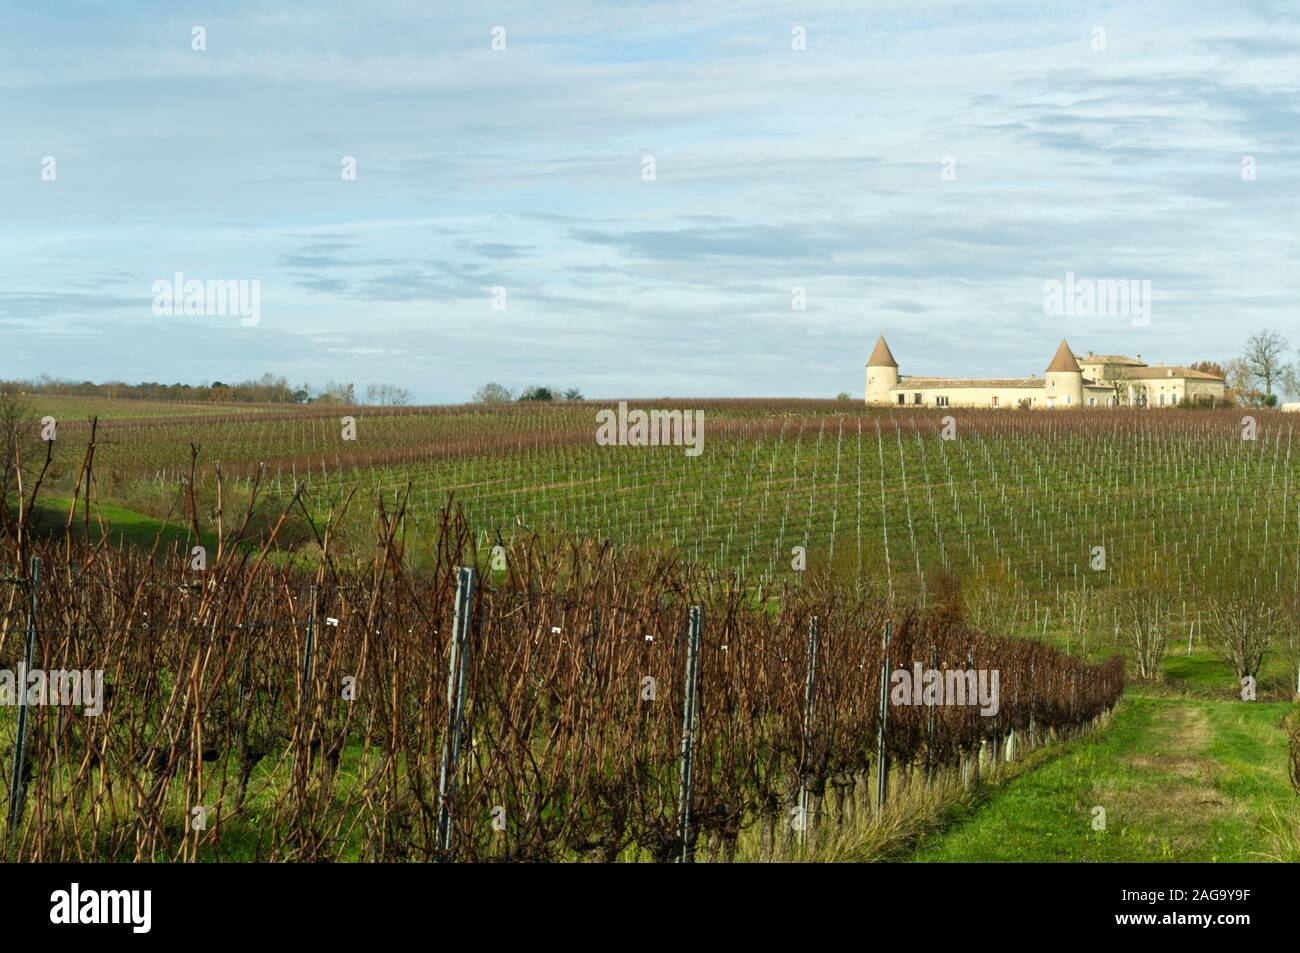 The vineyards of Chateaux Vigeroux in winter in the Bordeaux wine region, Gironde, France. Stock Photo